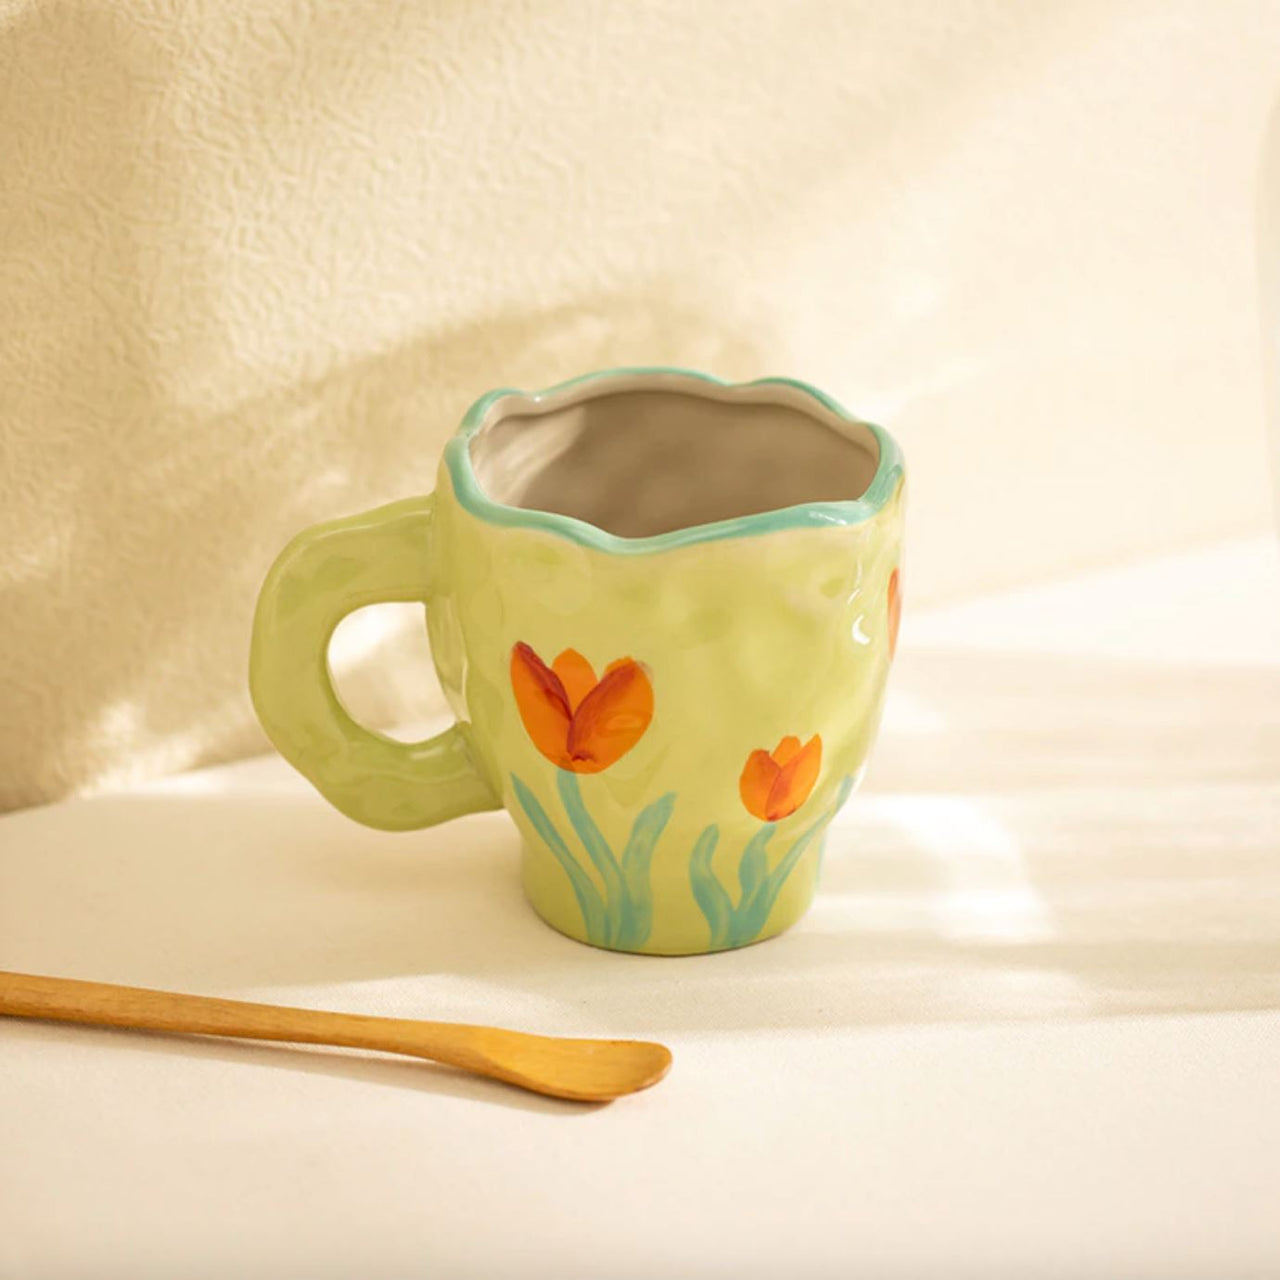 "Lily" Hand-painted Flower Ceramic Cup / Mug coffee cup Artedimo 